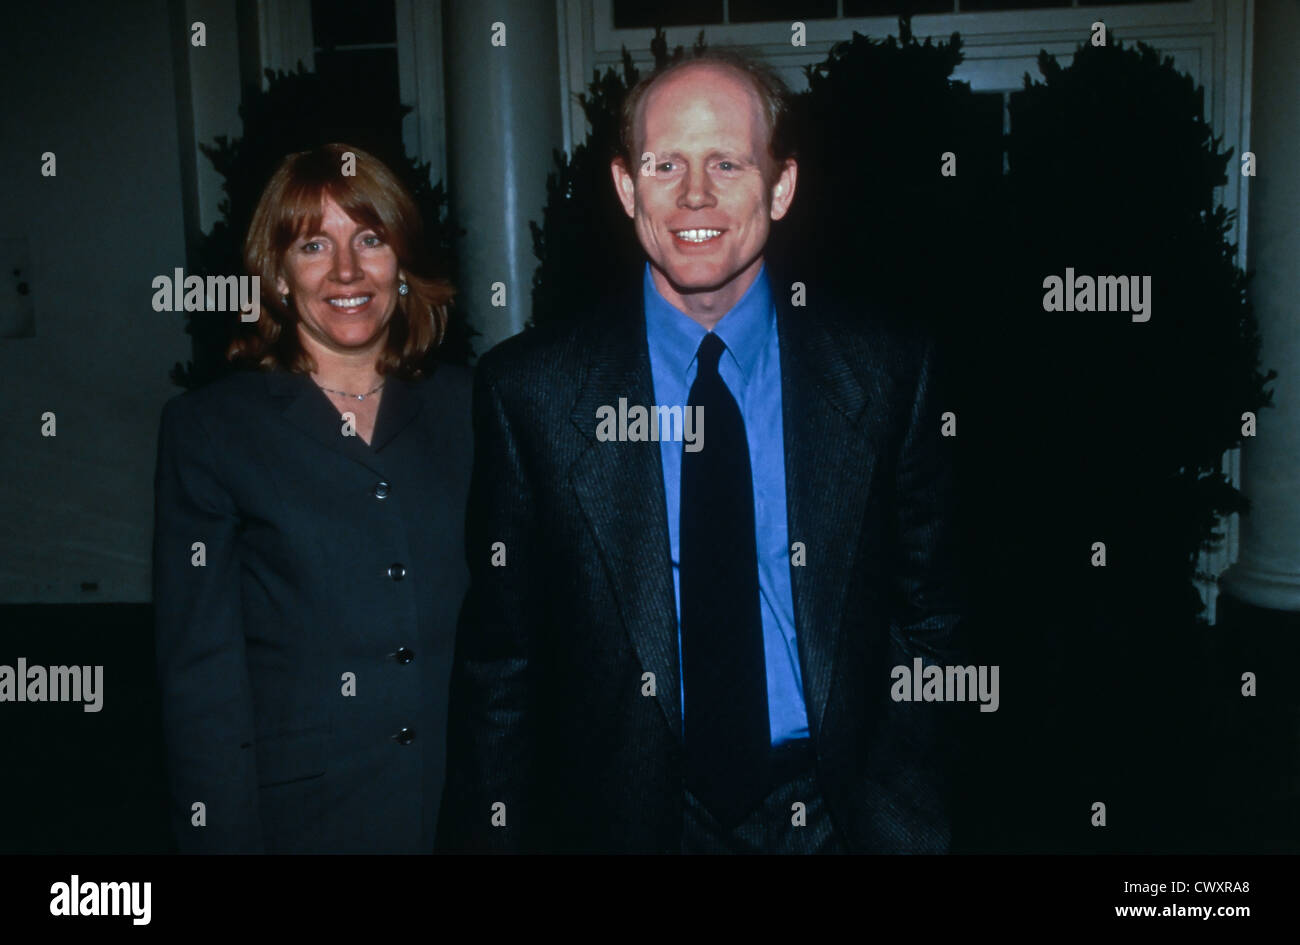 Actor and Director Ron Howard and wife Cheryl Alley arrive at the White House to attend an event marking the anniversary of the Apollo space program March 5, 1998 in Washington, DC. Stock Photo